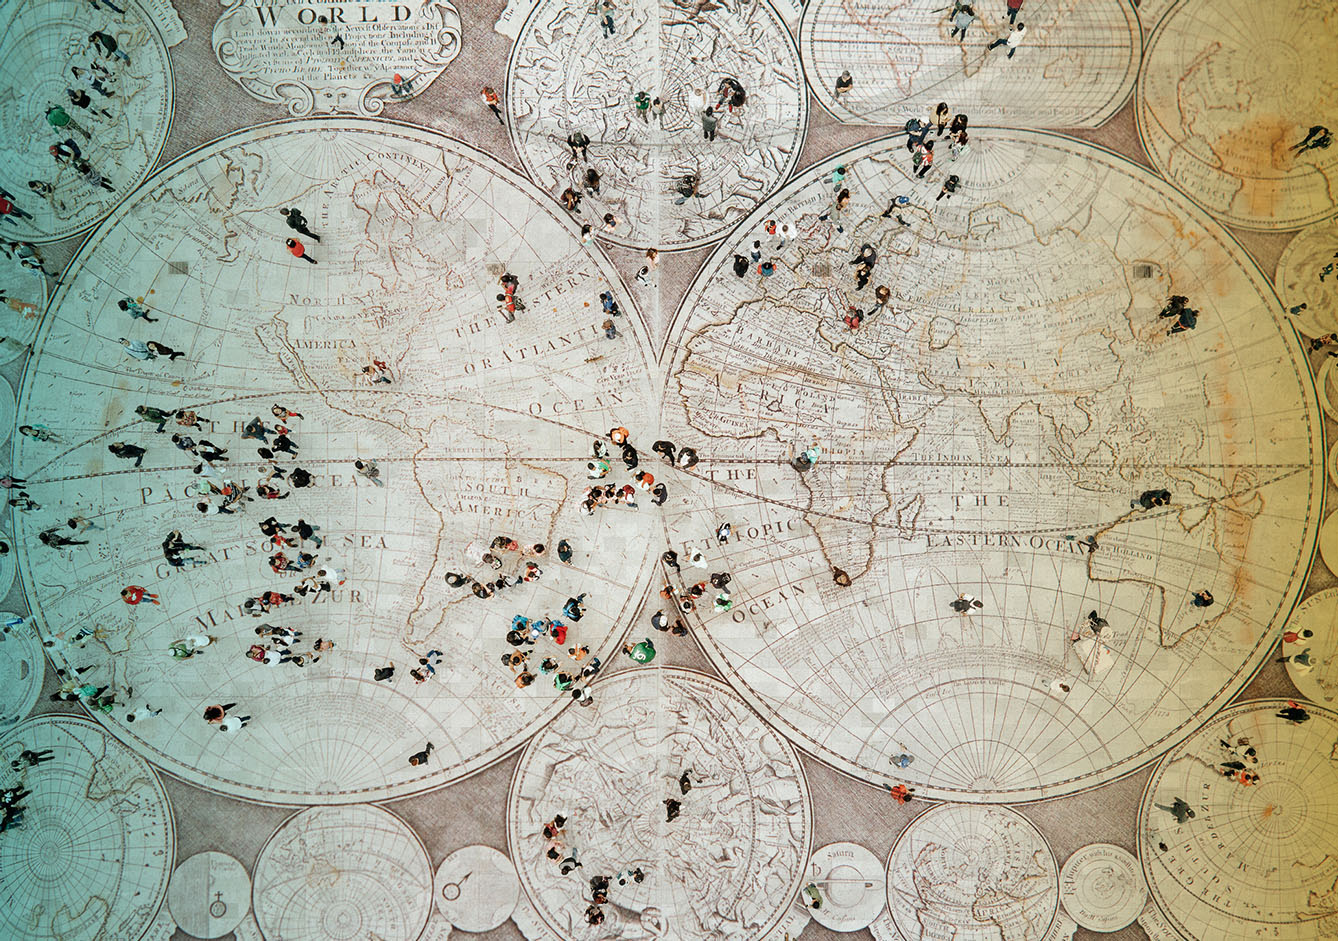 Crowd walking on global map. Composition made with antique map from 1779